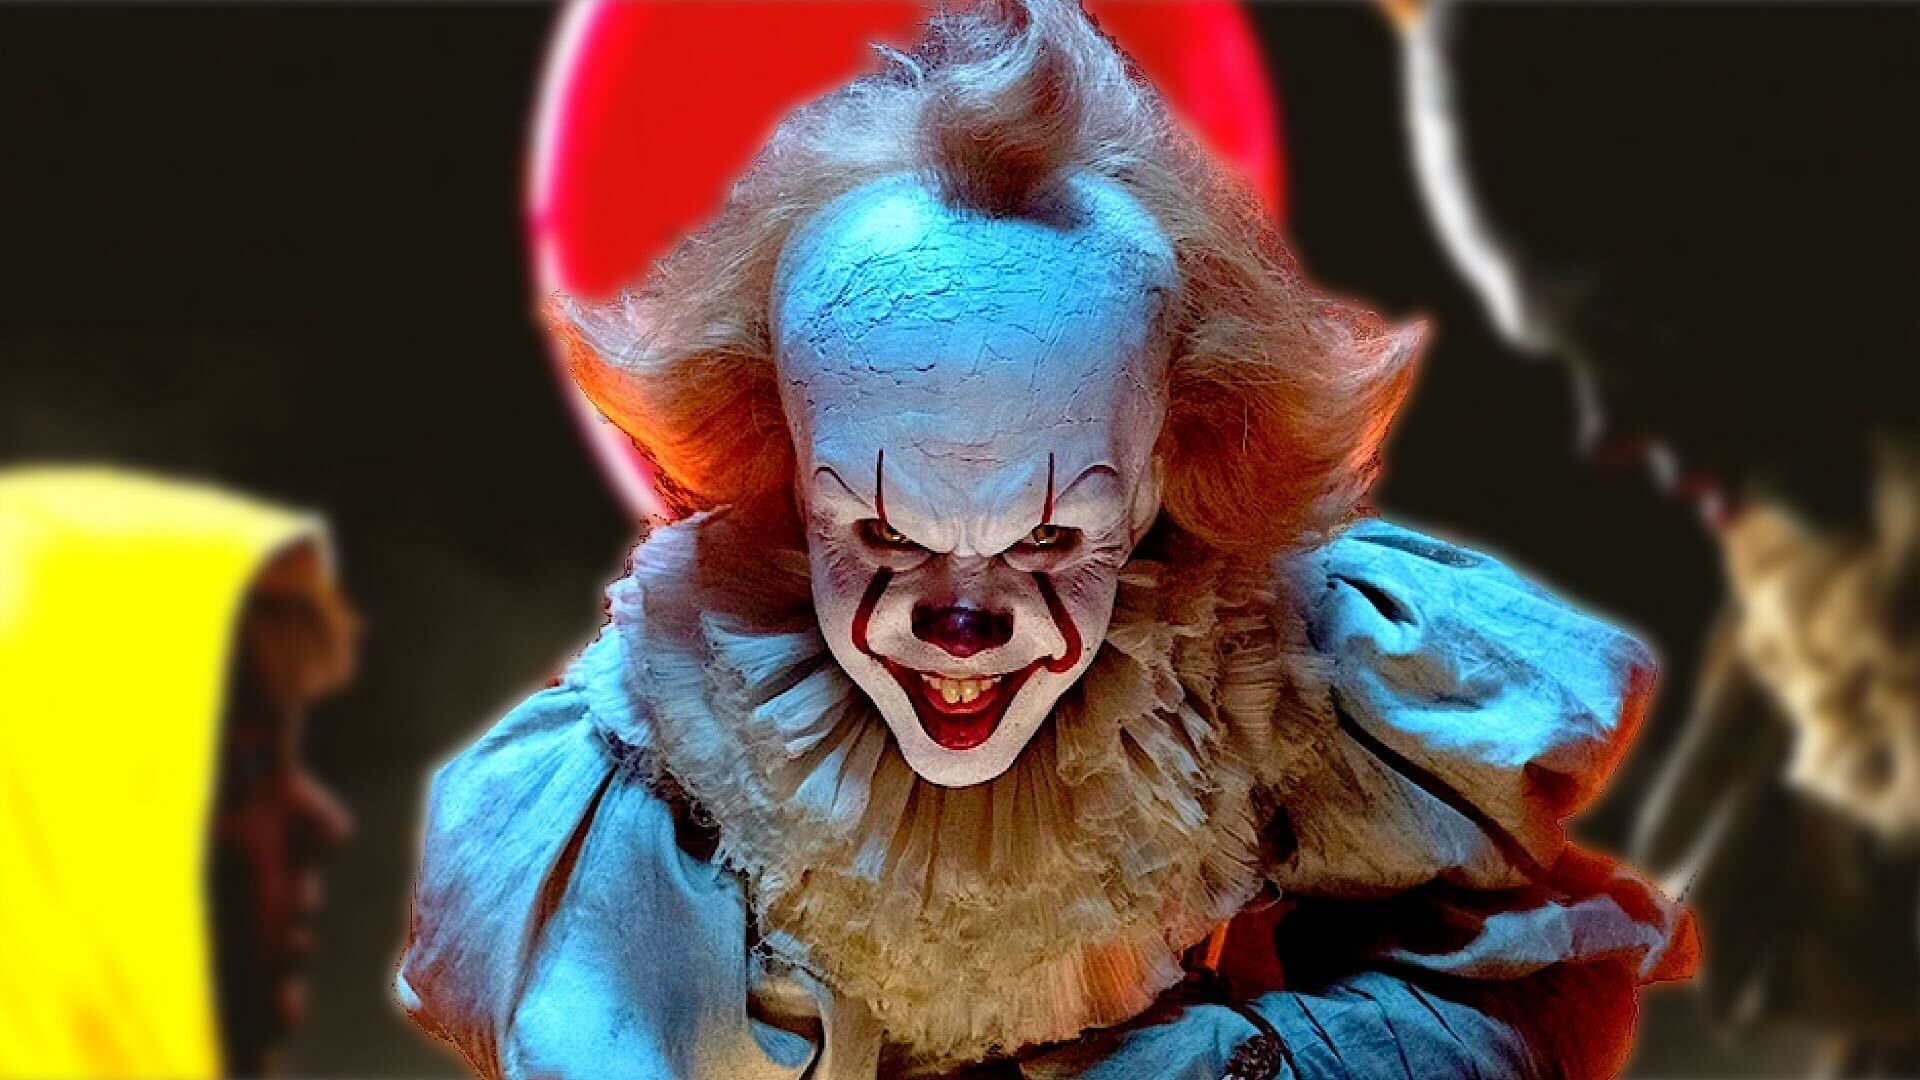 Composite of It poster with Pennywise in the center